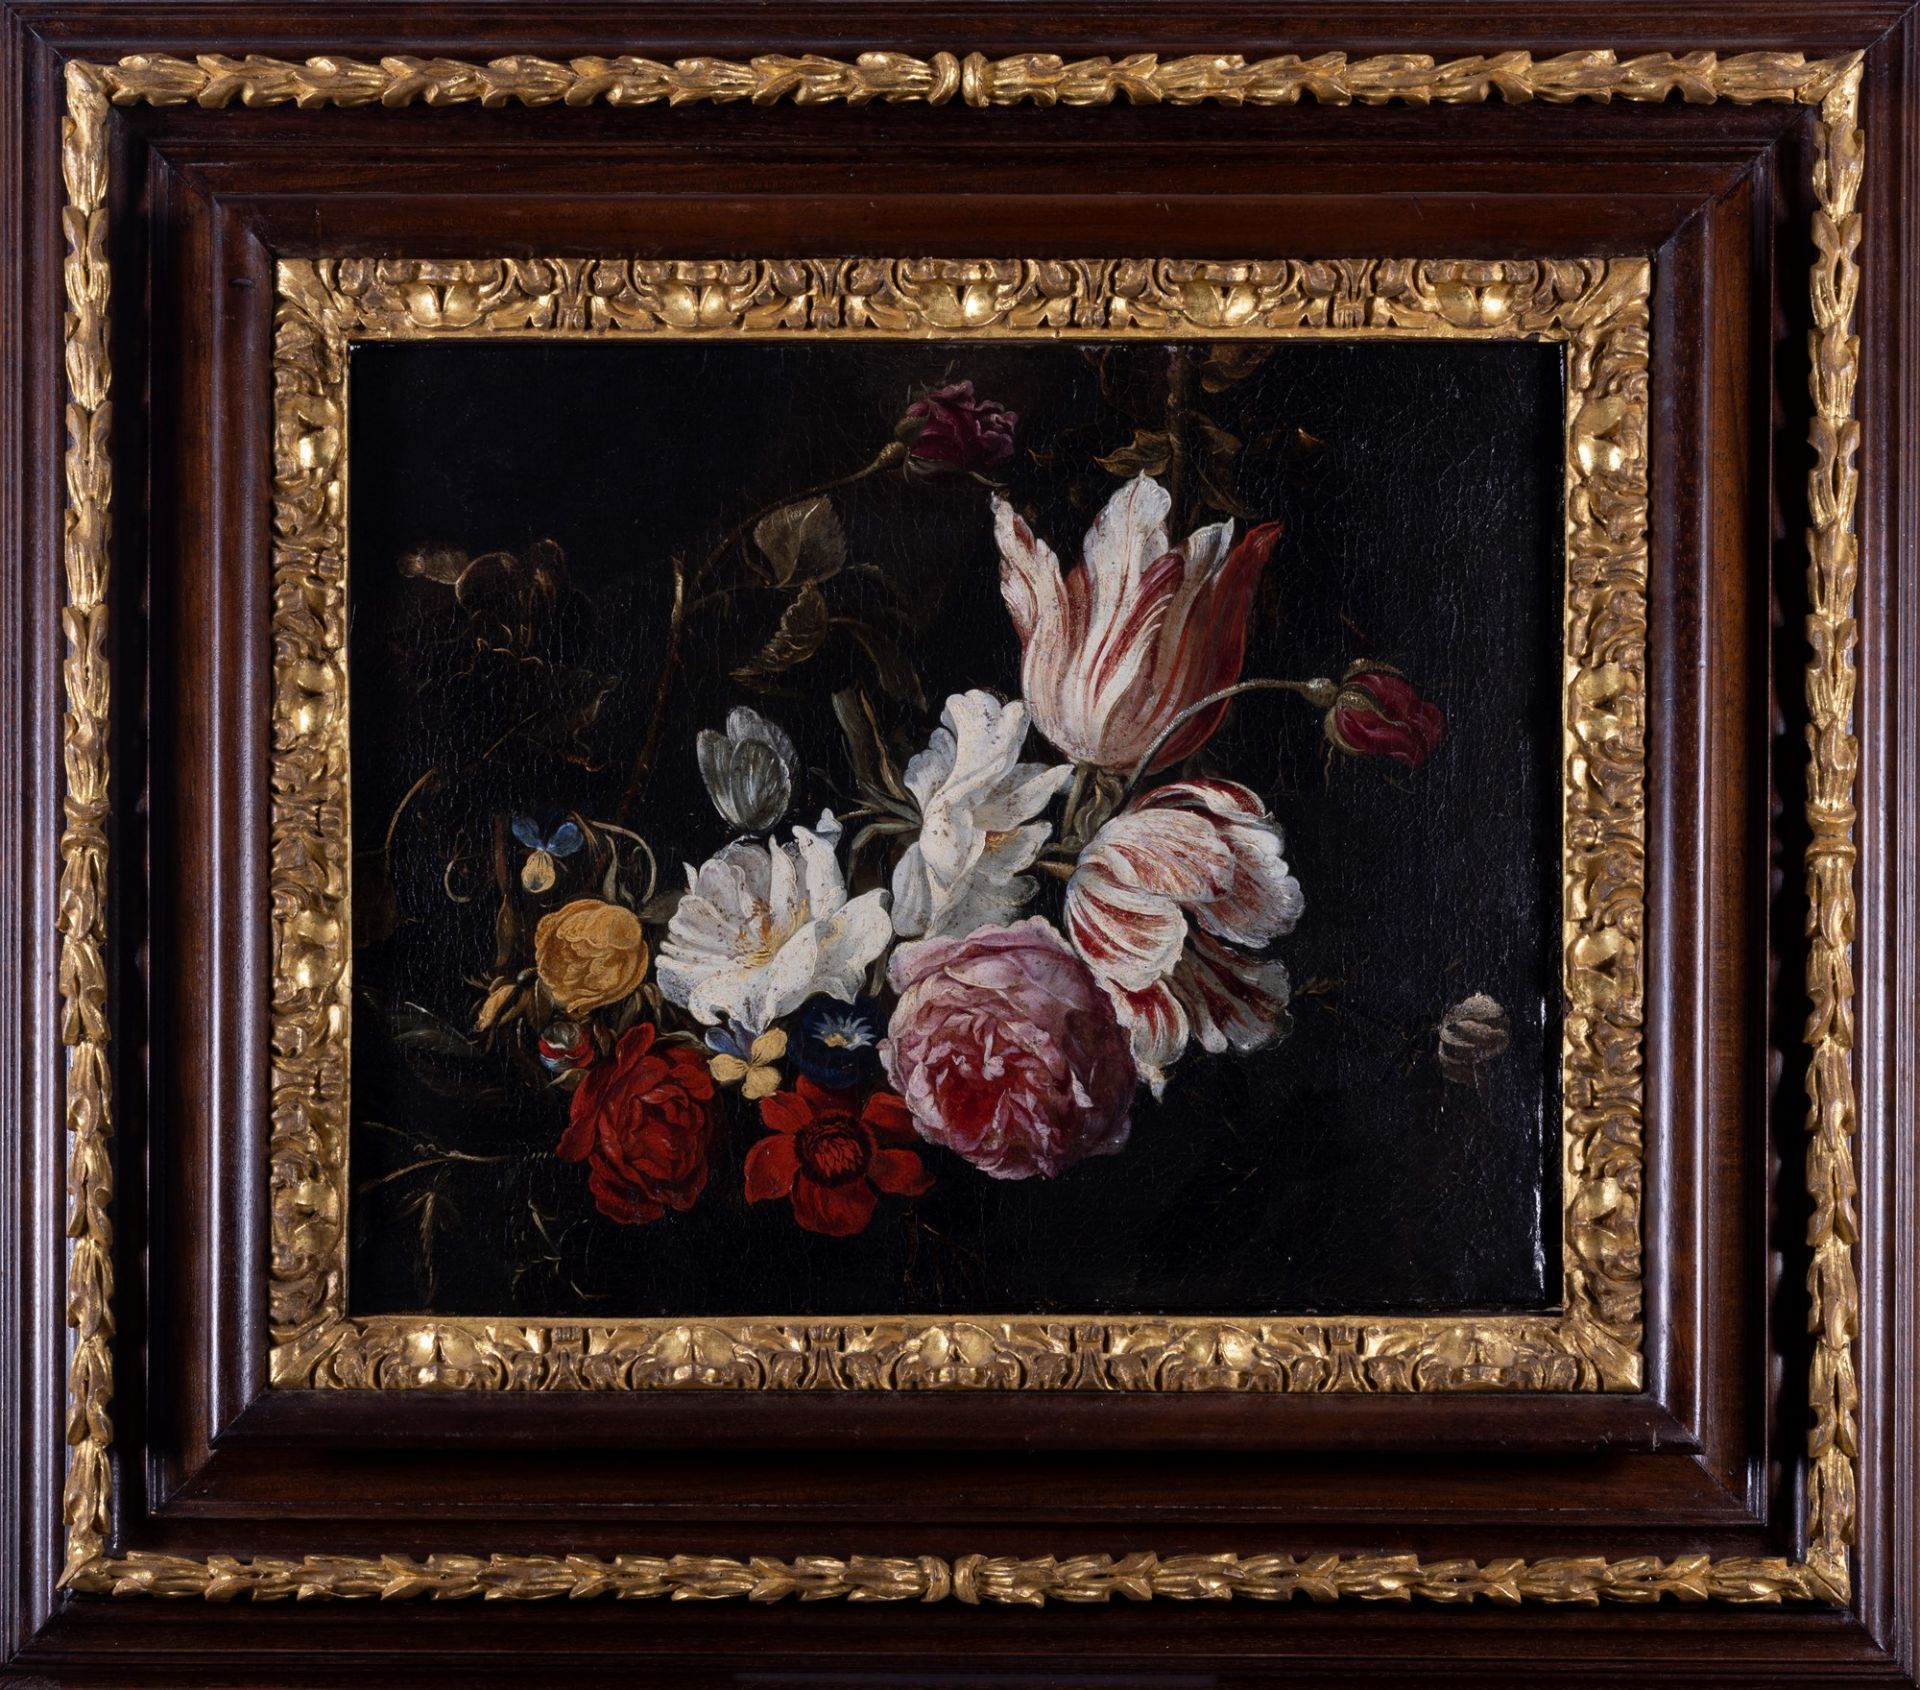 Scuola fiamminga, secolo XVII - Roses, tulips and other flowers - Image 2 of 3